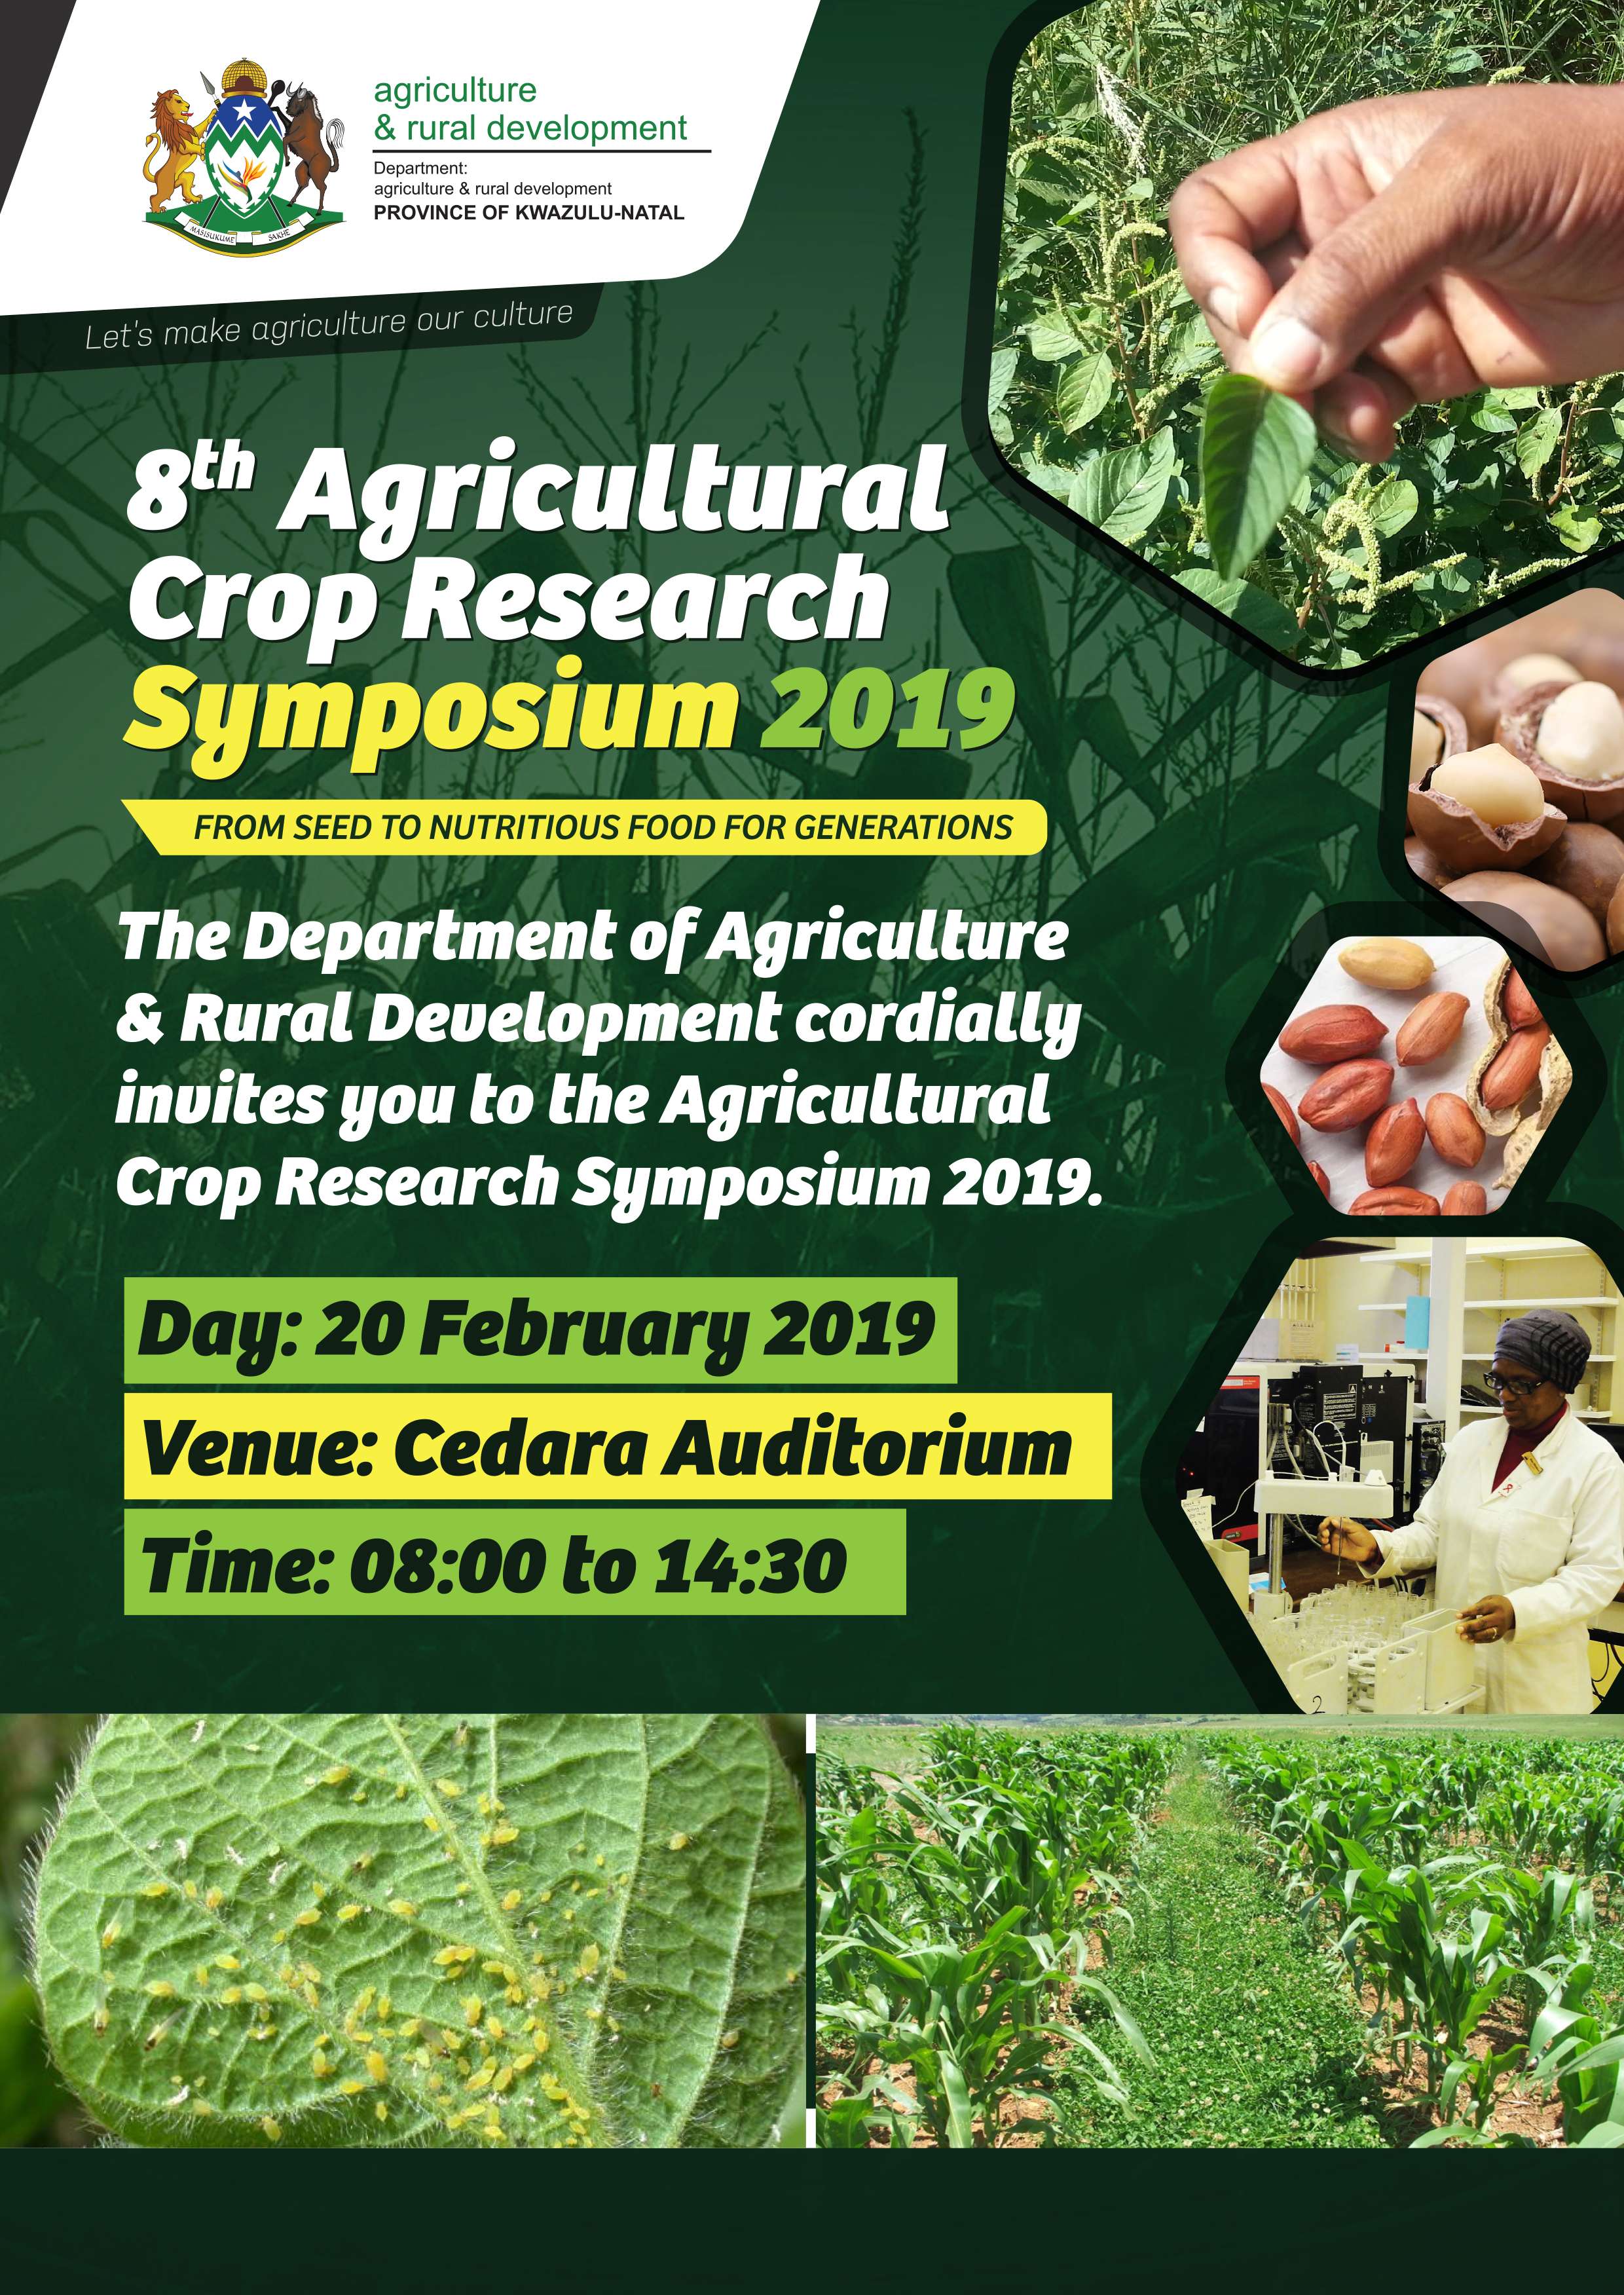 8th Agricultural Crop Research Symposium 2019